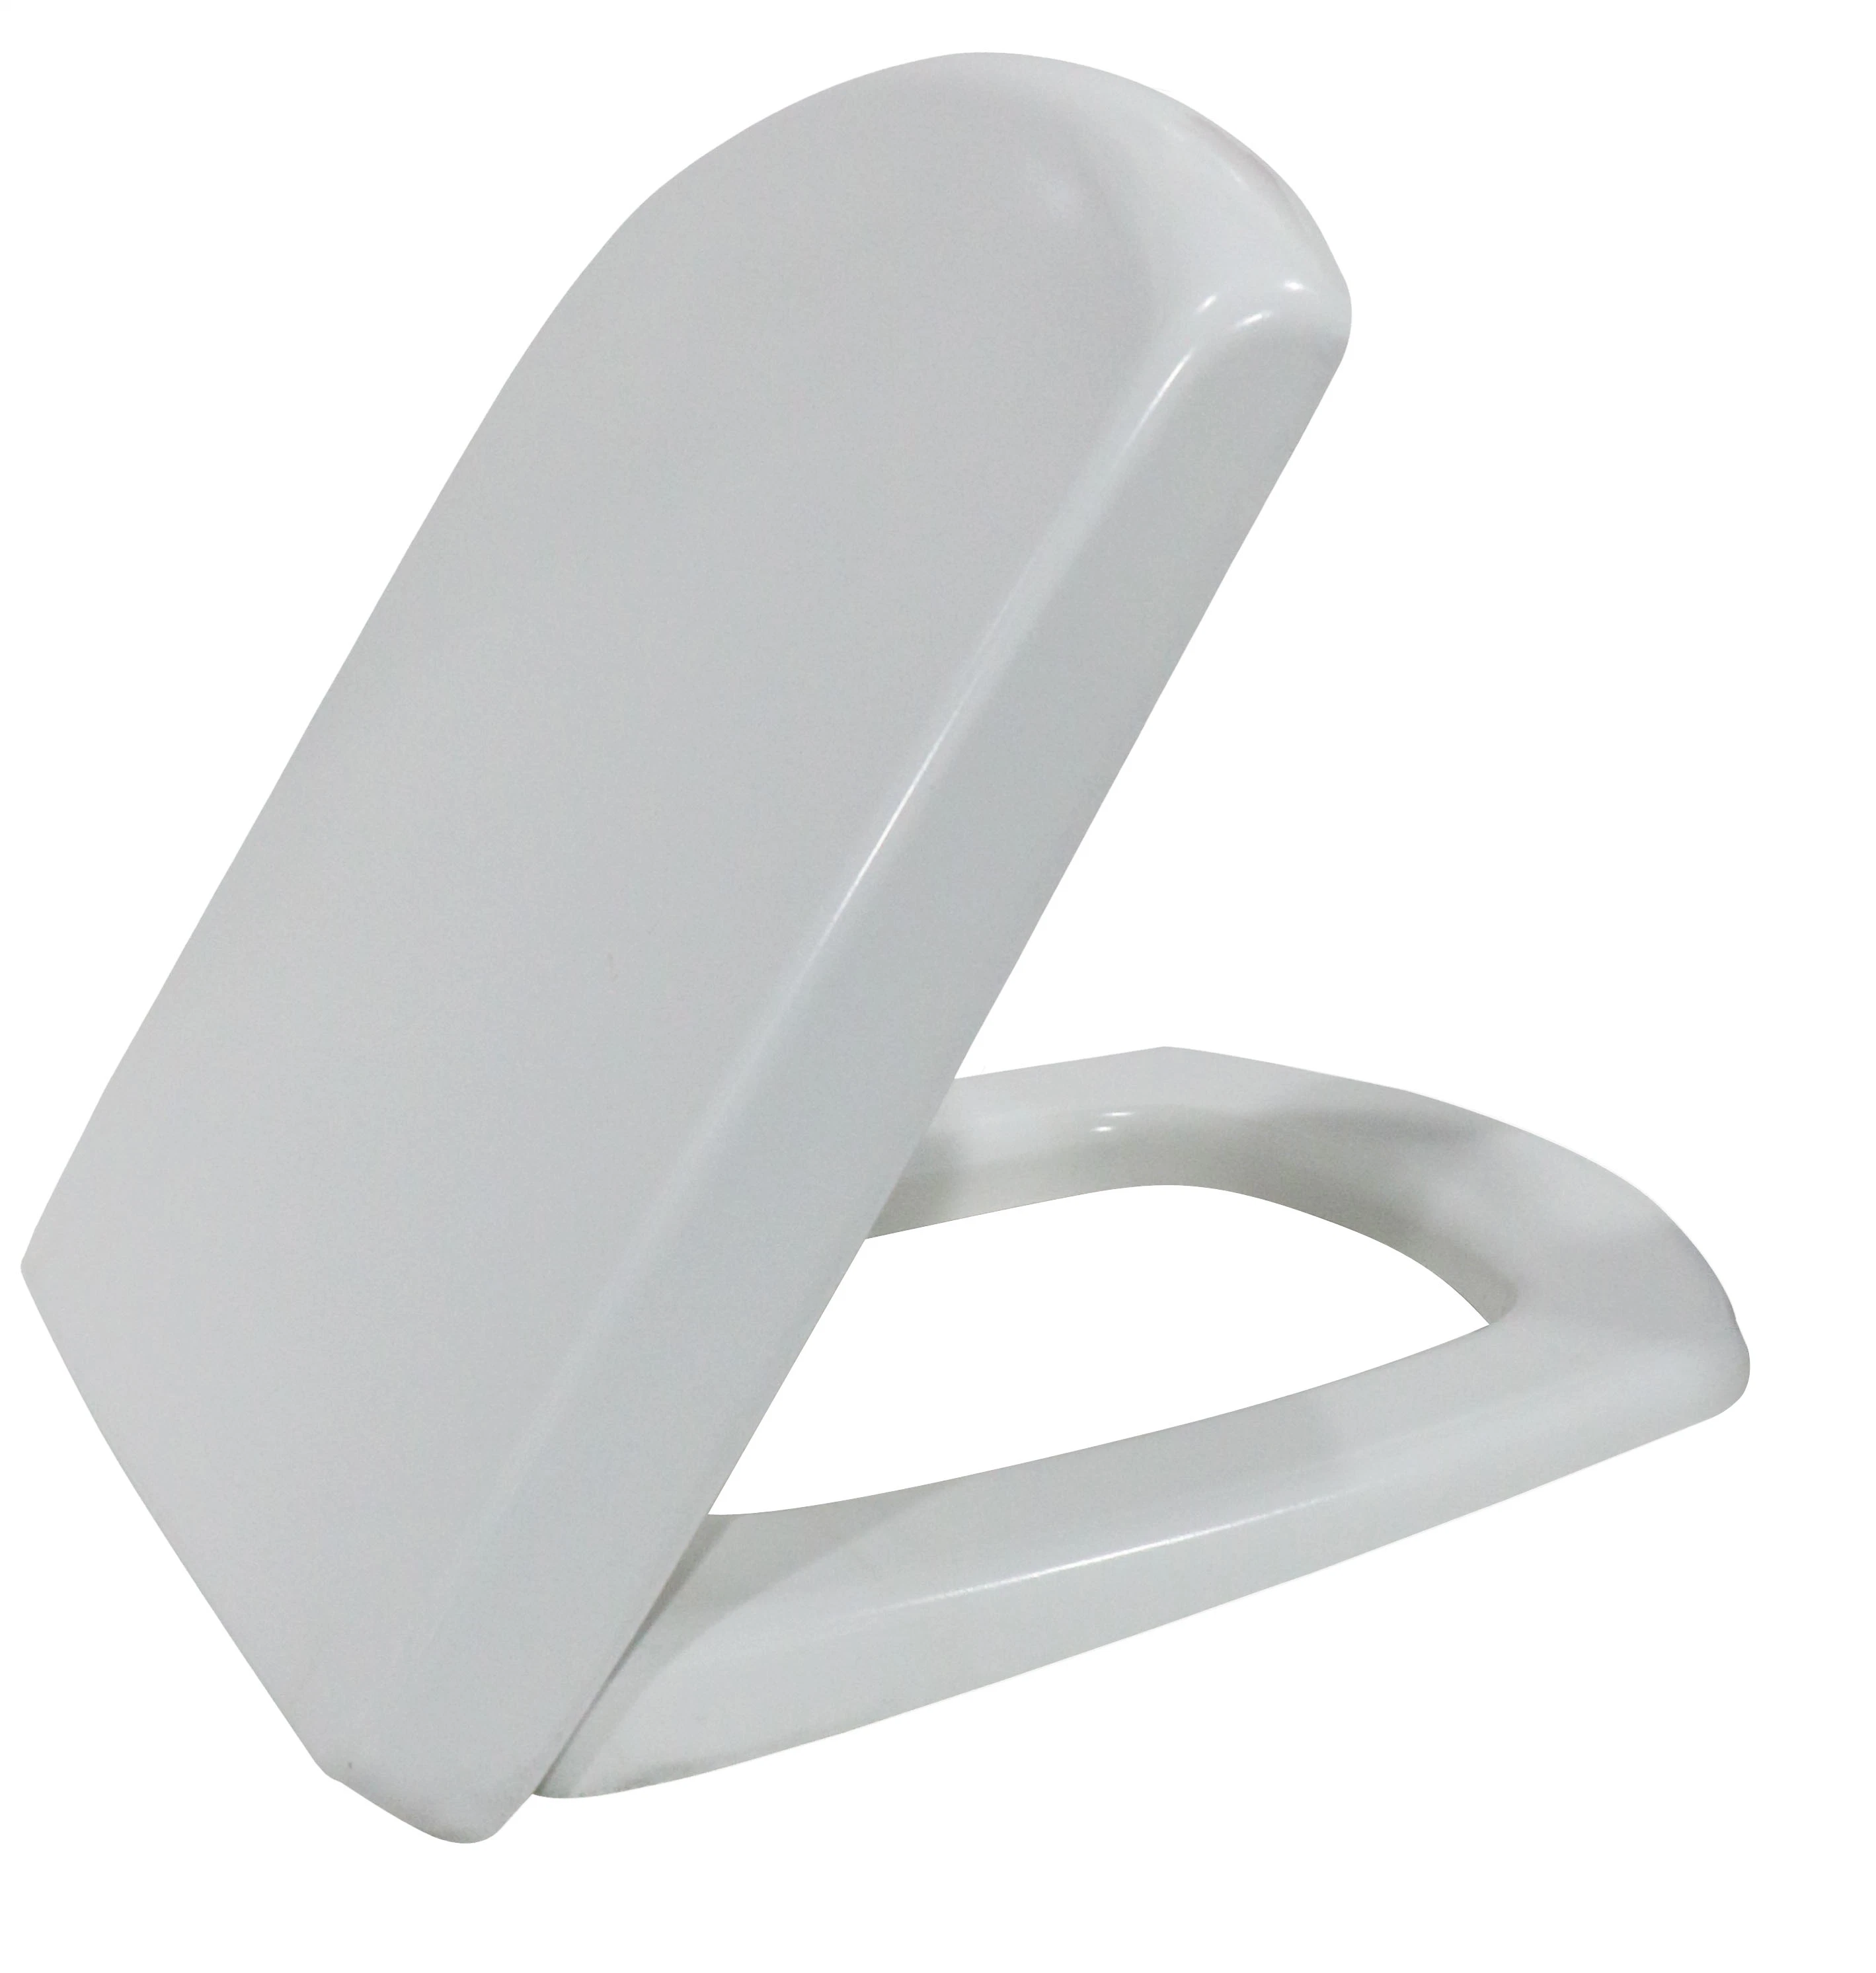 Toilet Lid Cover Stainless Steel Toilet Seat